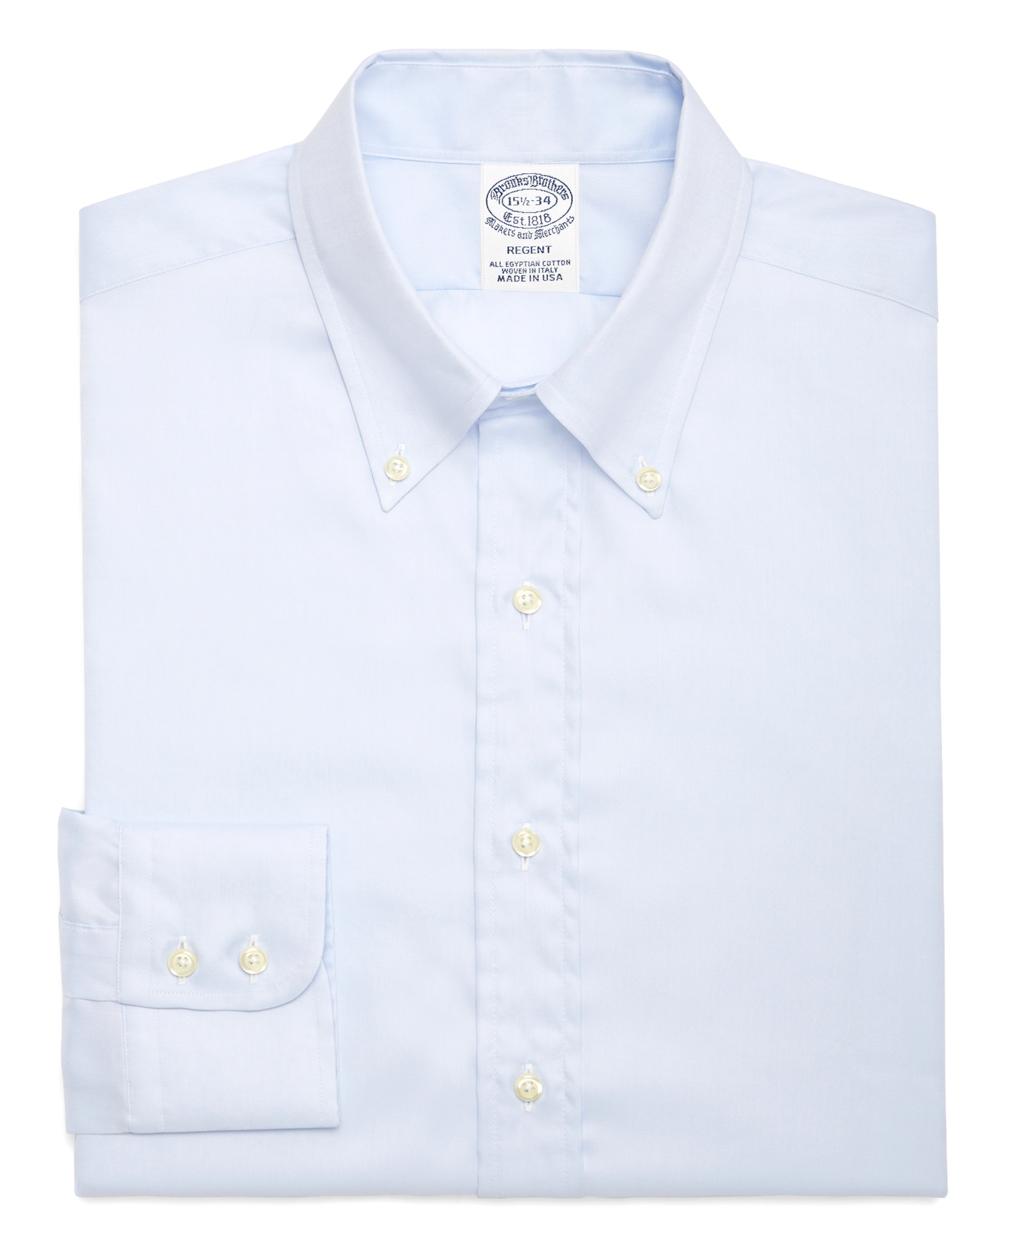 Lyst - Brooks Brothers Regent Fit Button-down Collar Dress Shirt in ...